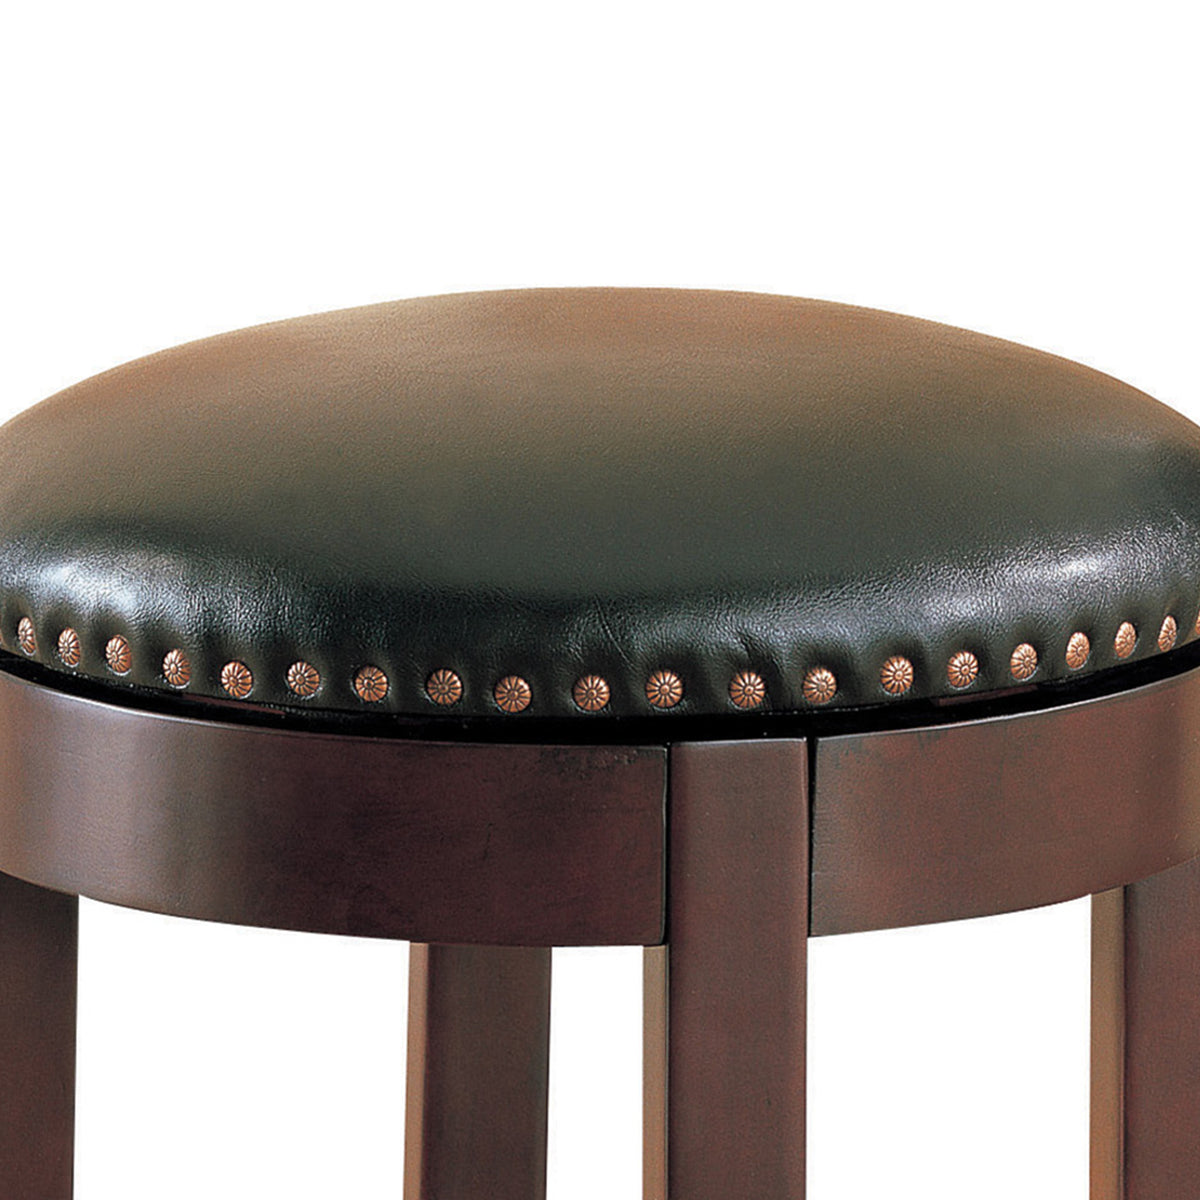 Round Wooden Counter Height Stool with Upholstered Seat, Brown, Set of 2 - BM68987